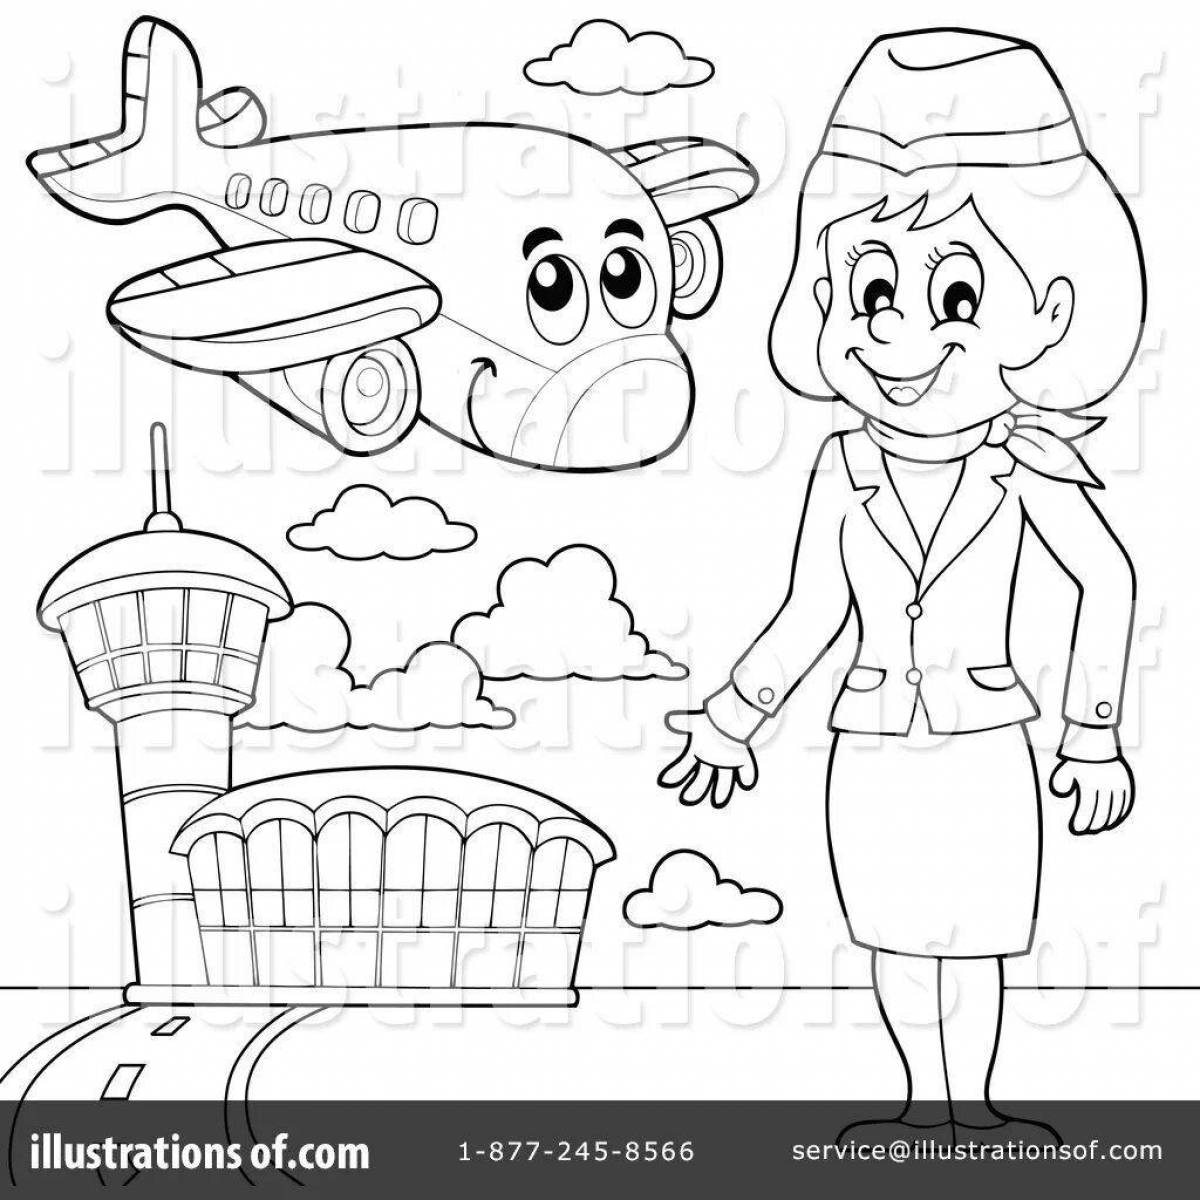 Bright stewardess coloring page